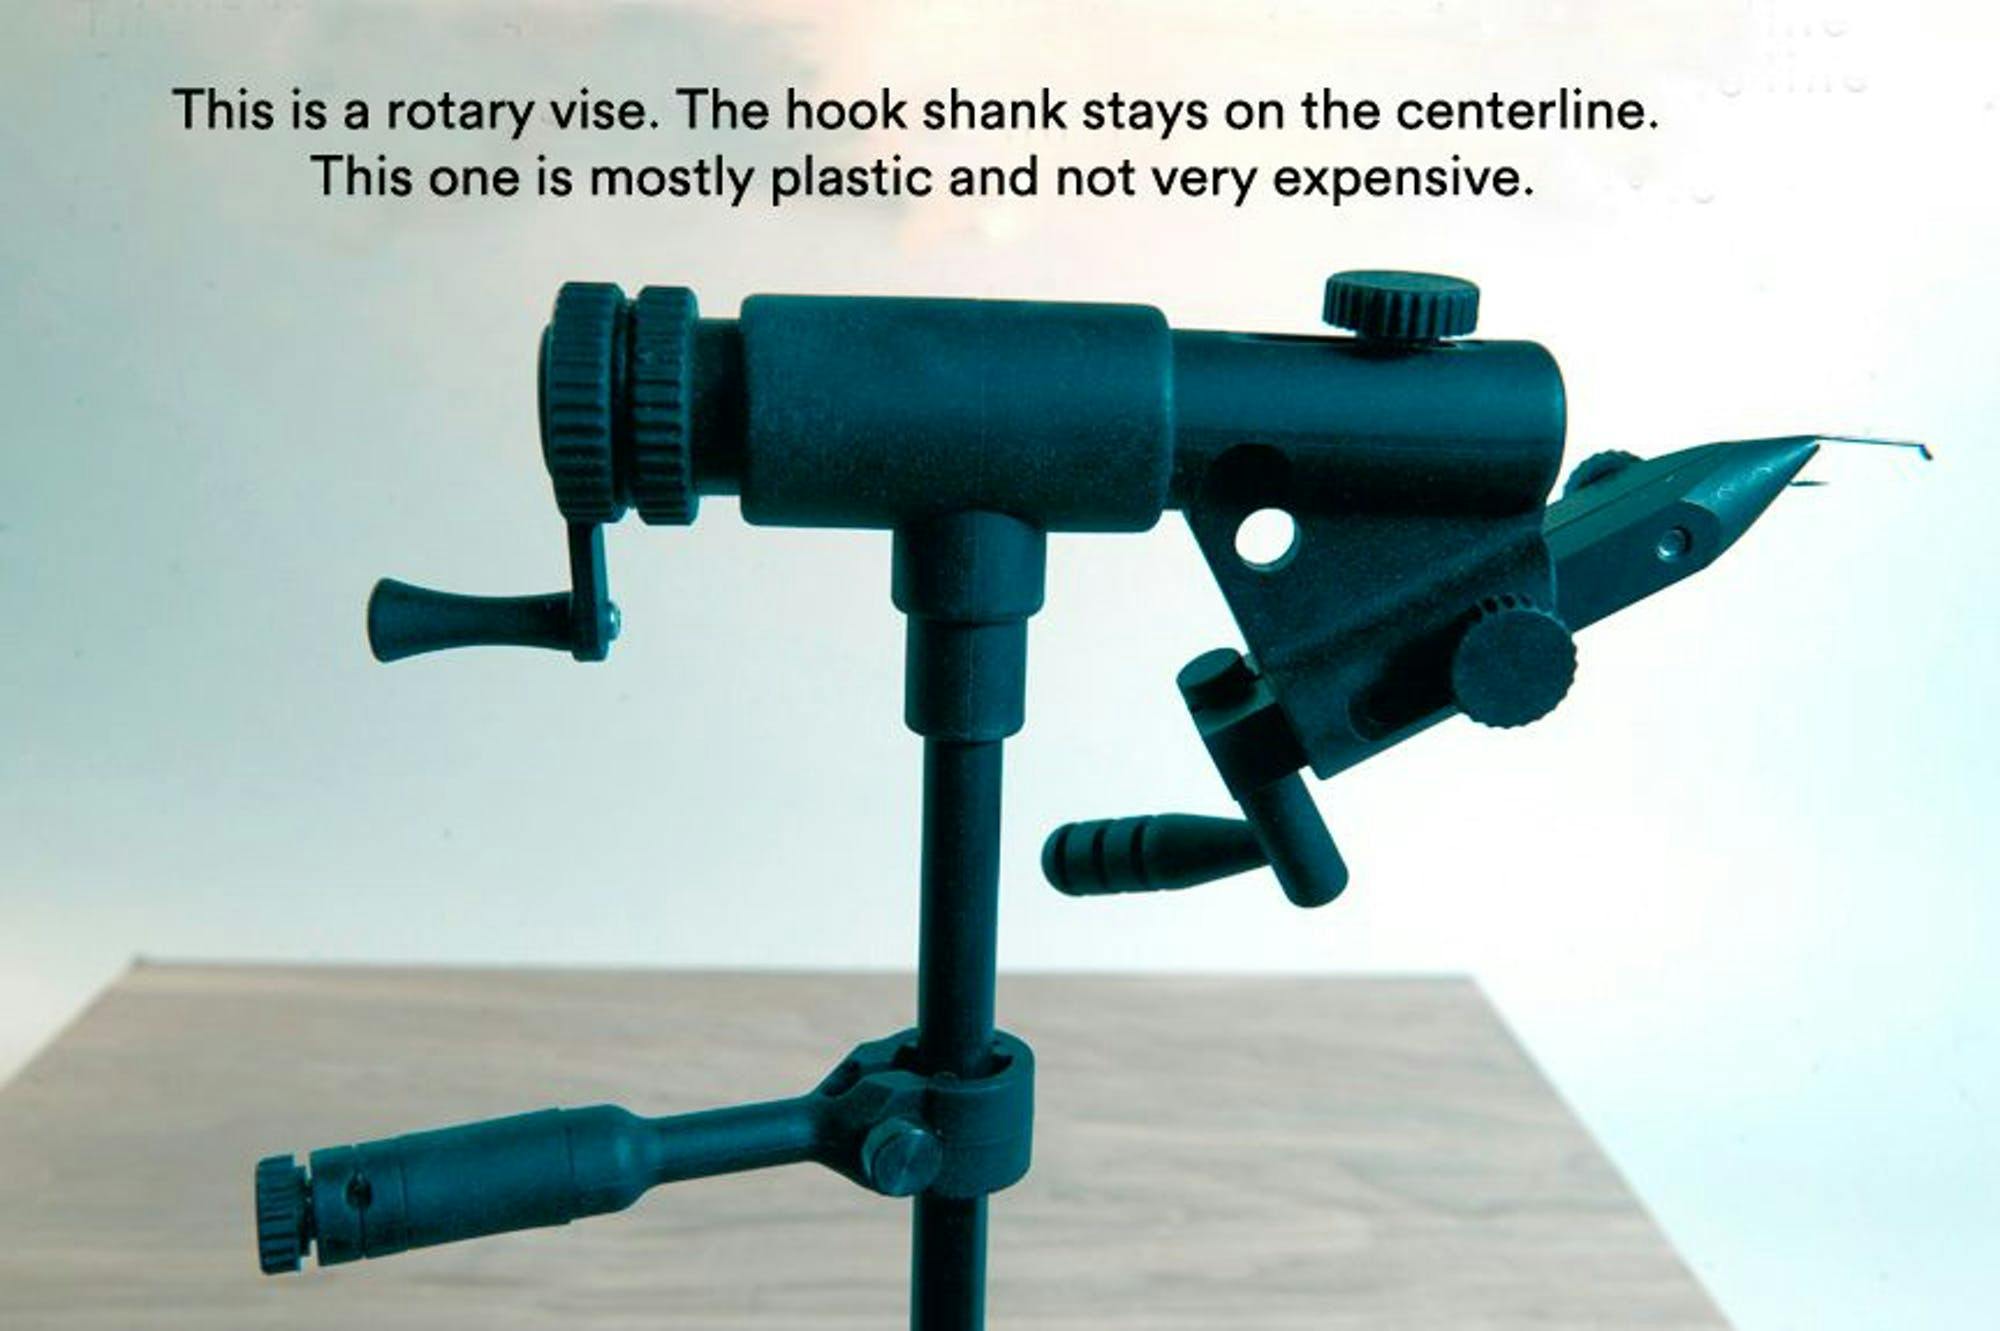 An image of a rotary vise above the plank of wood it's clamped to. It reads "This is a rotary vise. The hook shank stays on the centerline. This one is mostly plastic and not expensive."